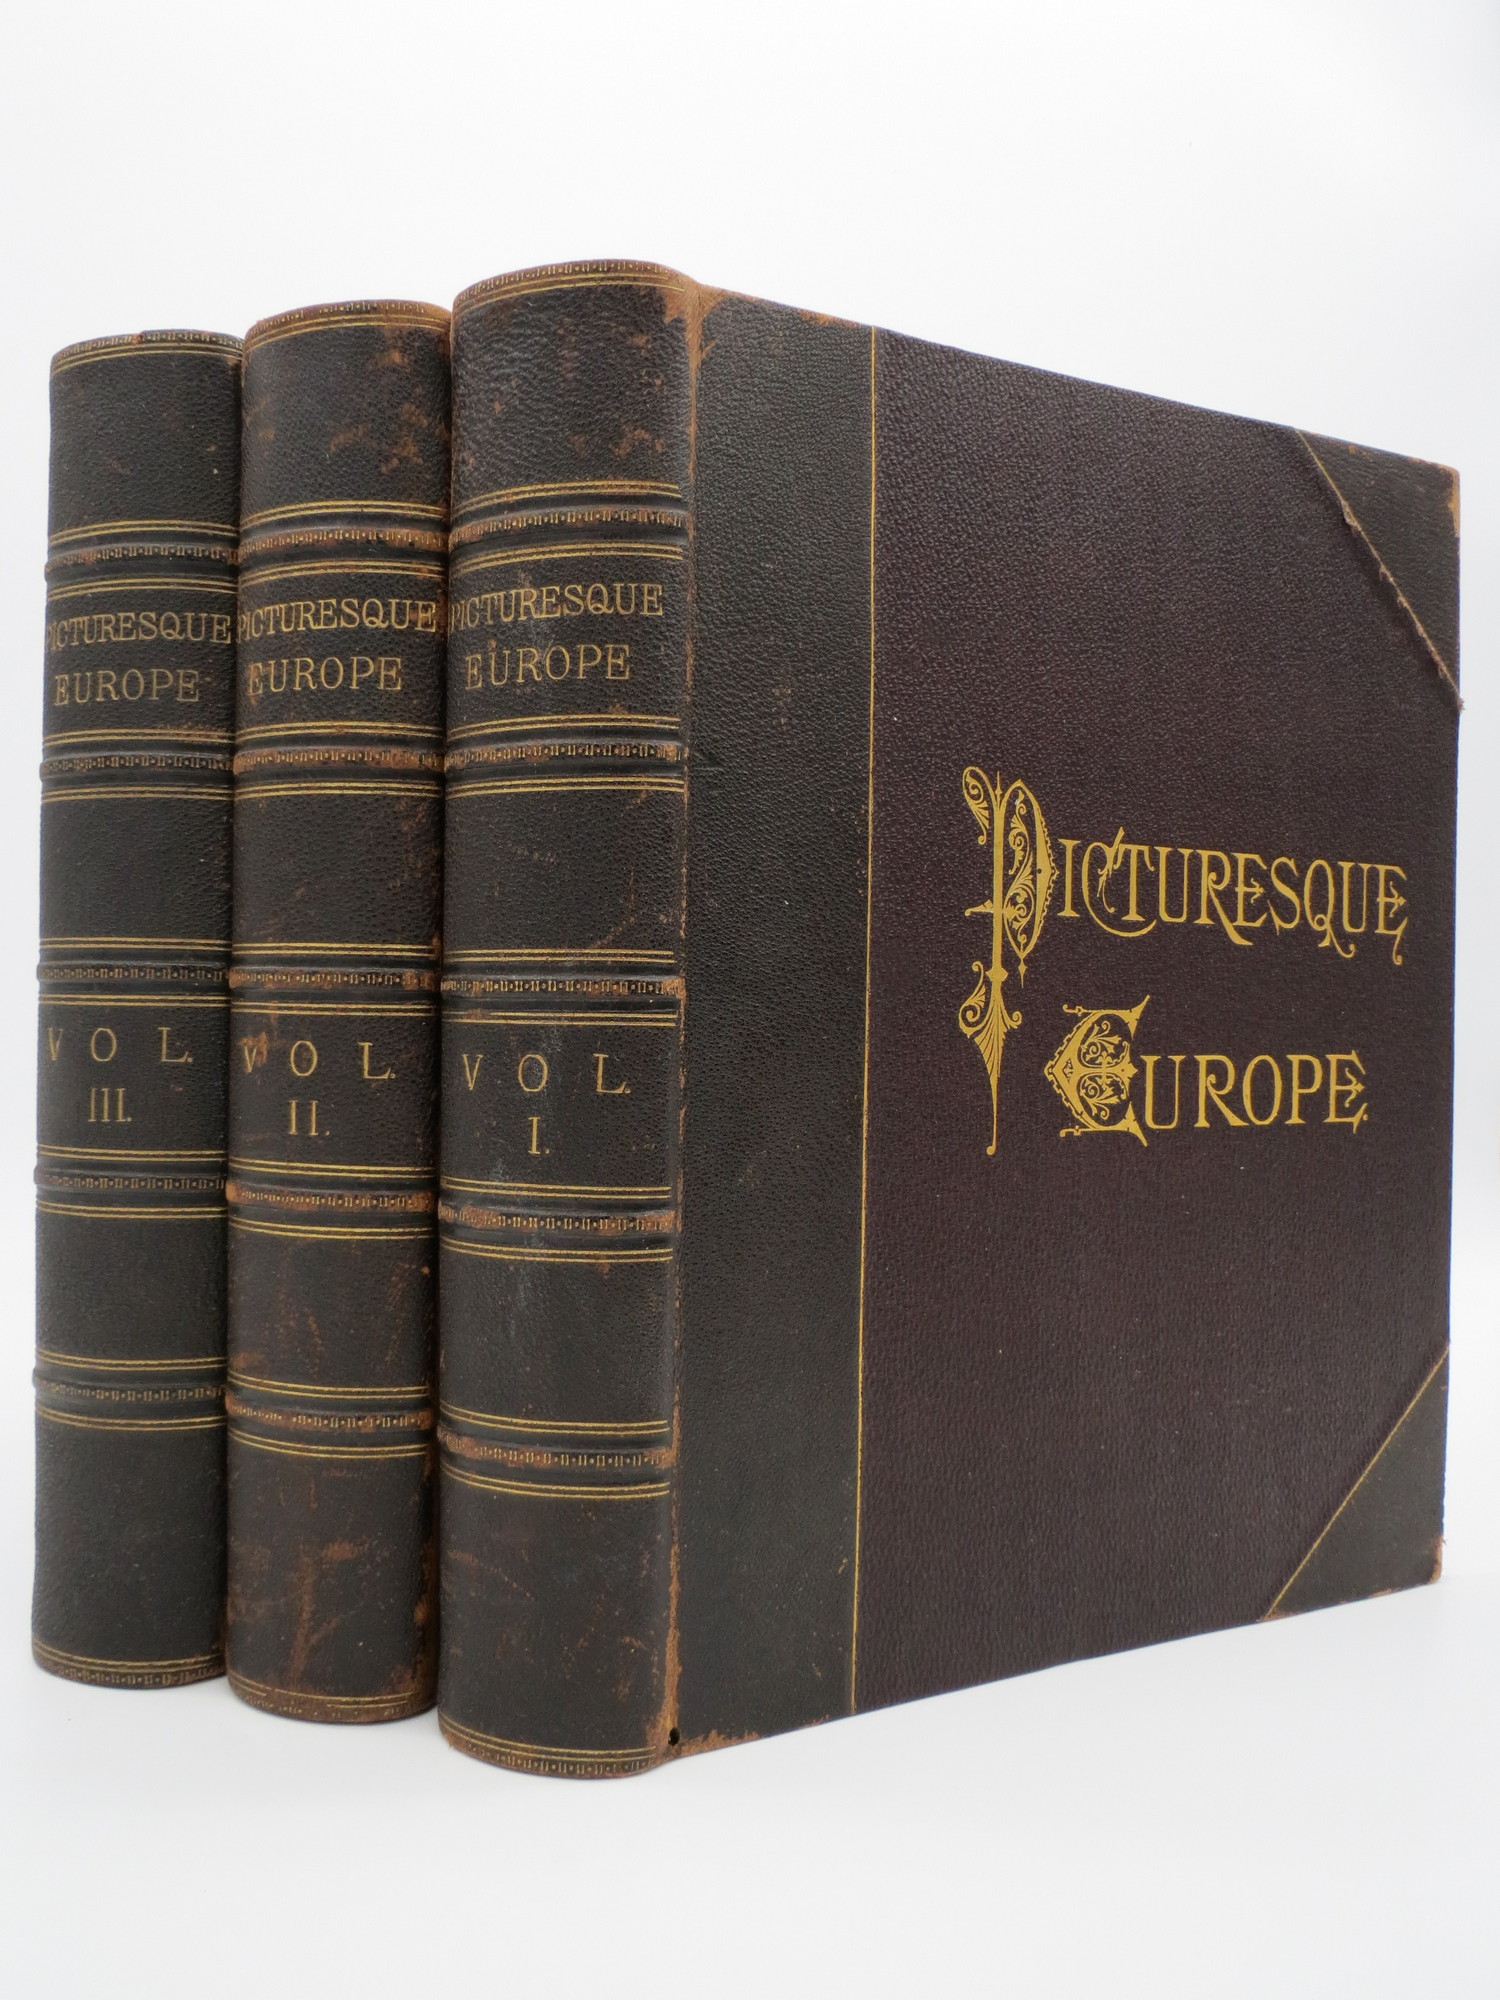 Image for PICTURESQUE EUROPE (COMPLETE 3 VOLUME LEATHER BOUND SET)  A Delineation by Pen and Pencil of the Natural Features and the Picturesque and Historical Places of Great Britain and the Continent.